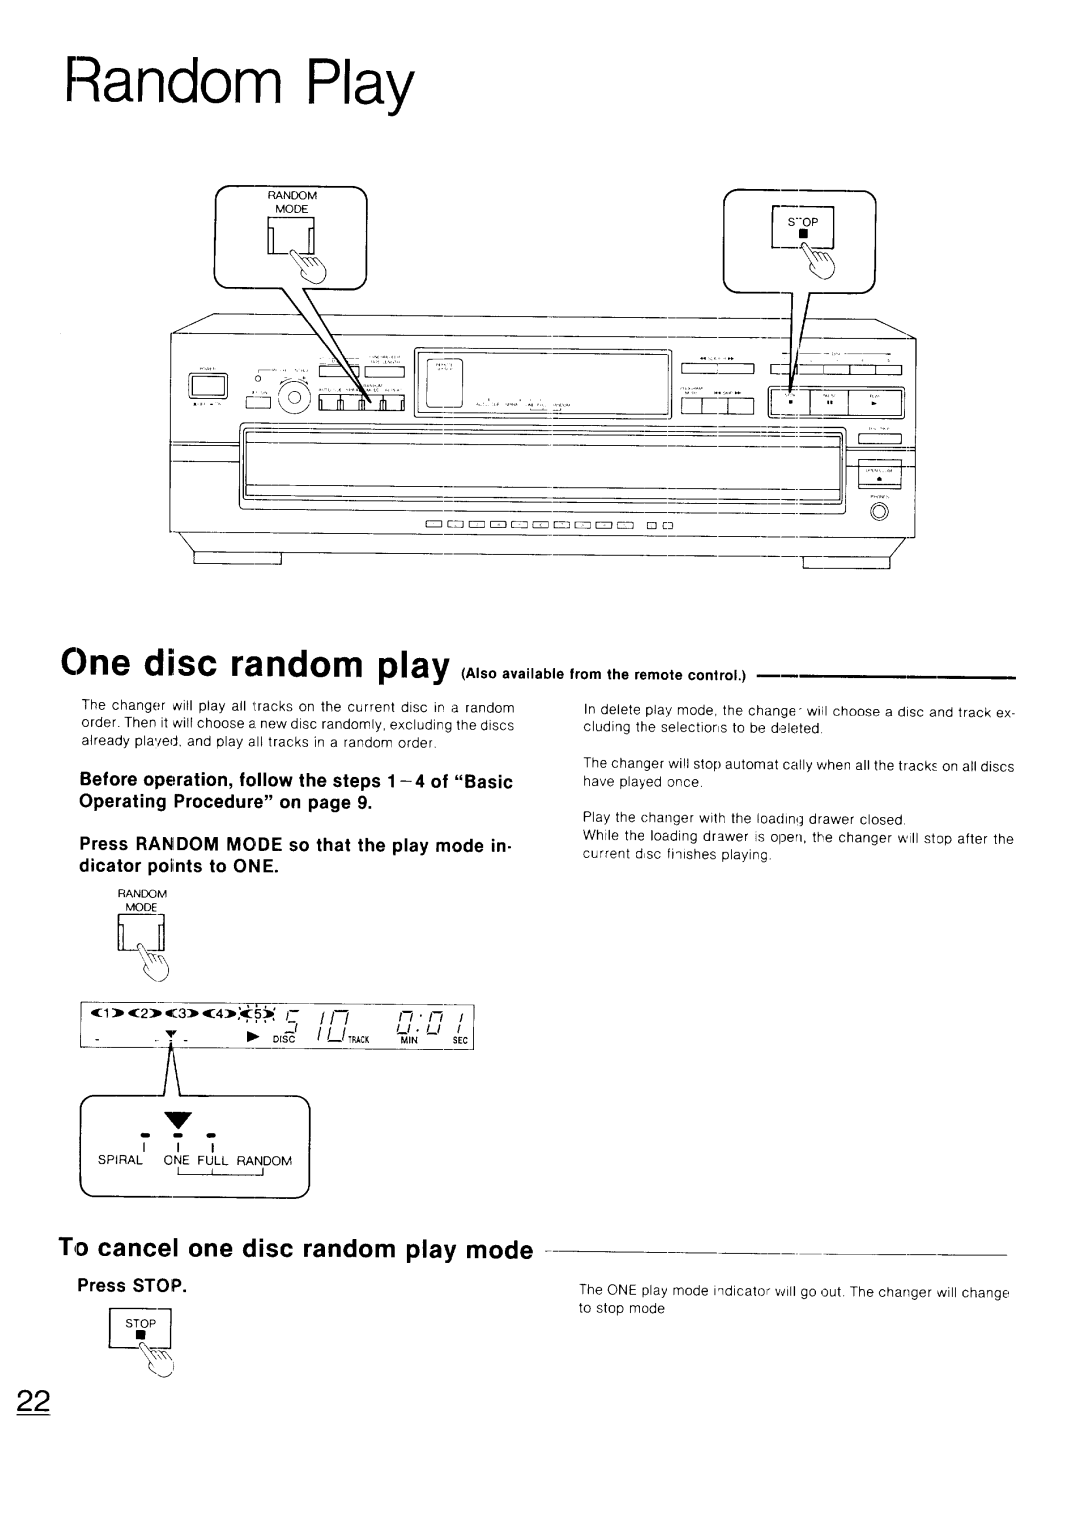 Technics SL-PD947 Random Play, Spiral, Before operation, follow the steps 1 -4 of Basic, Operating Procedure on page 